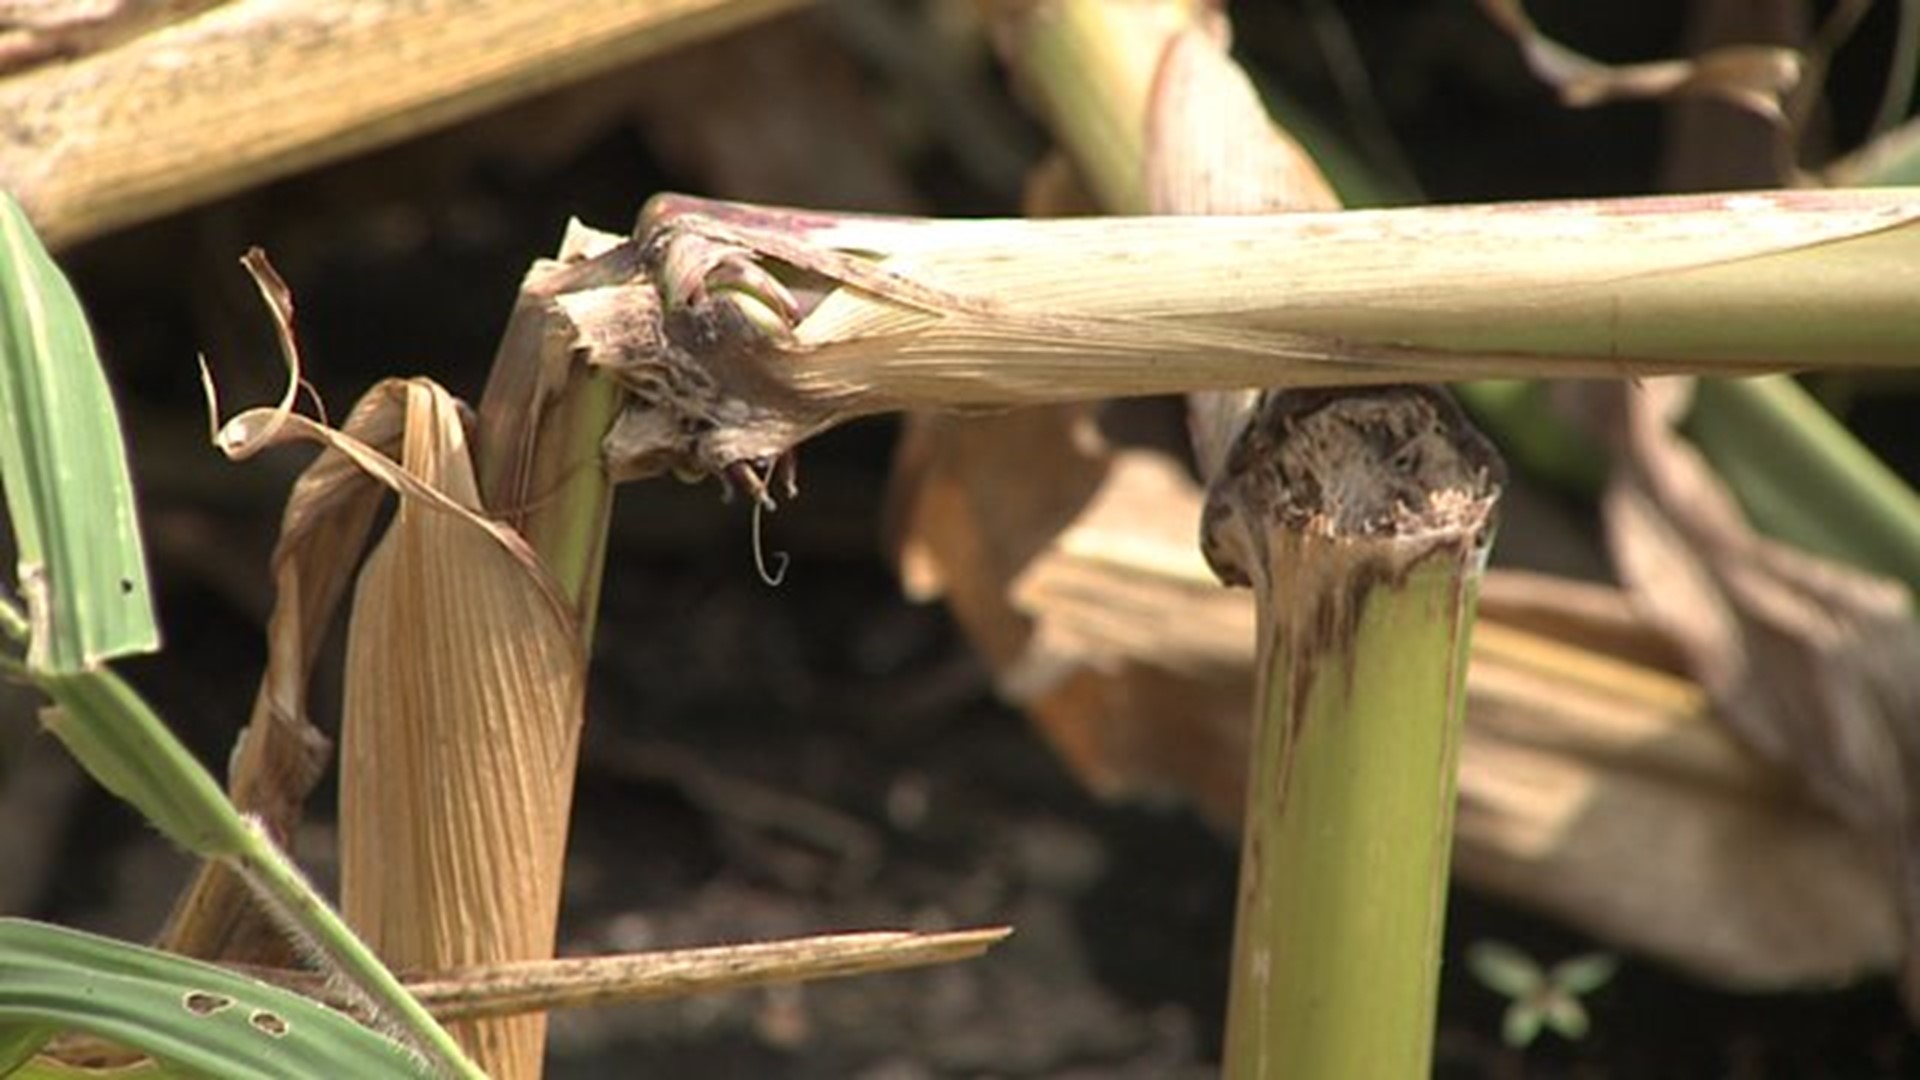 Extreme weather takes a toll on Illinois crops and farms